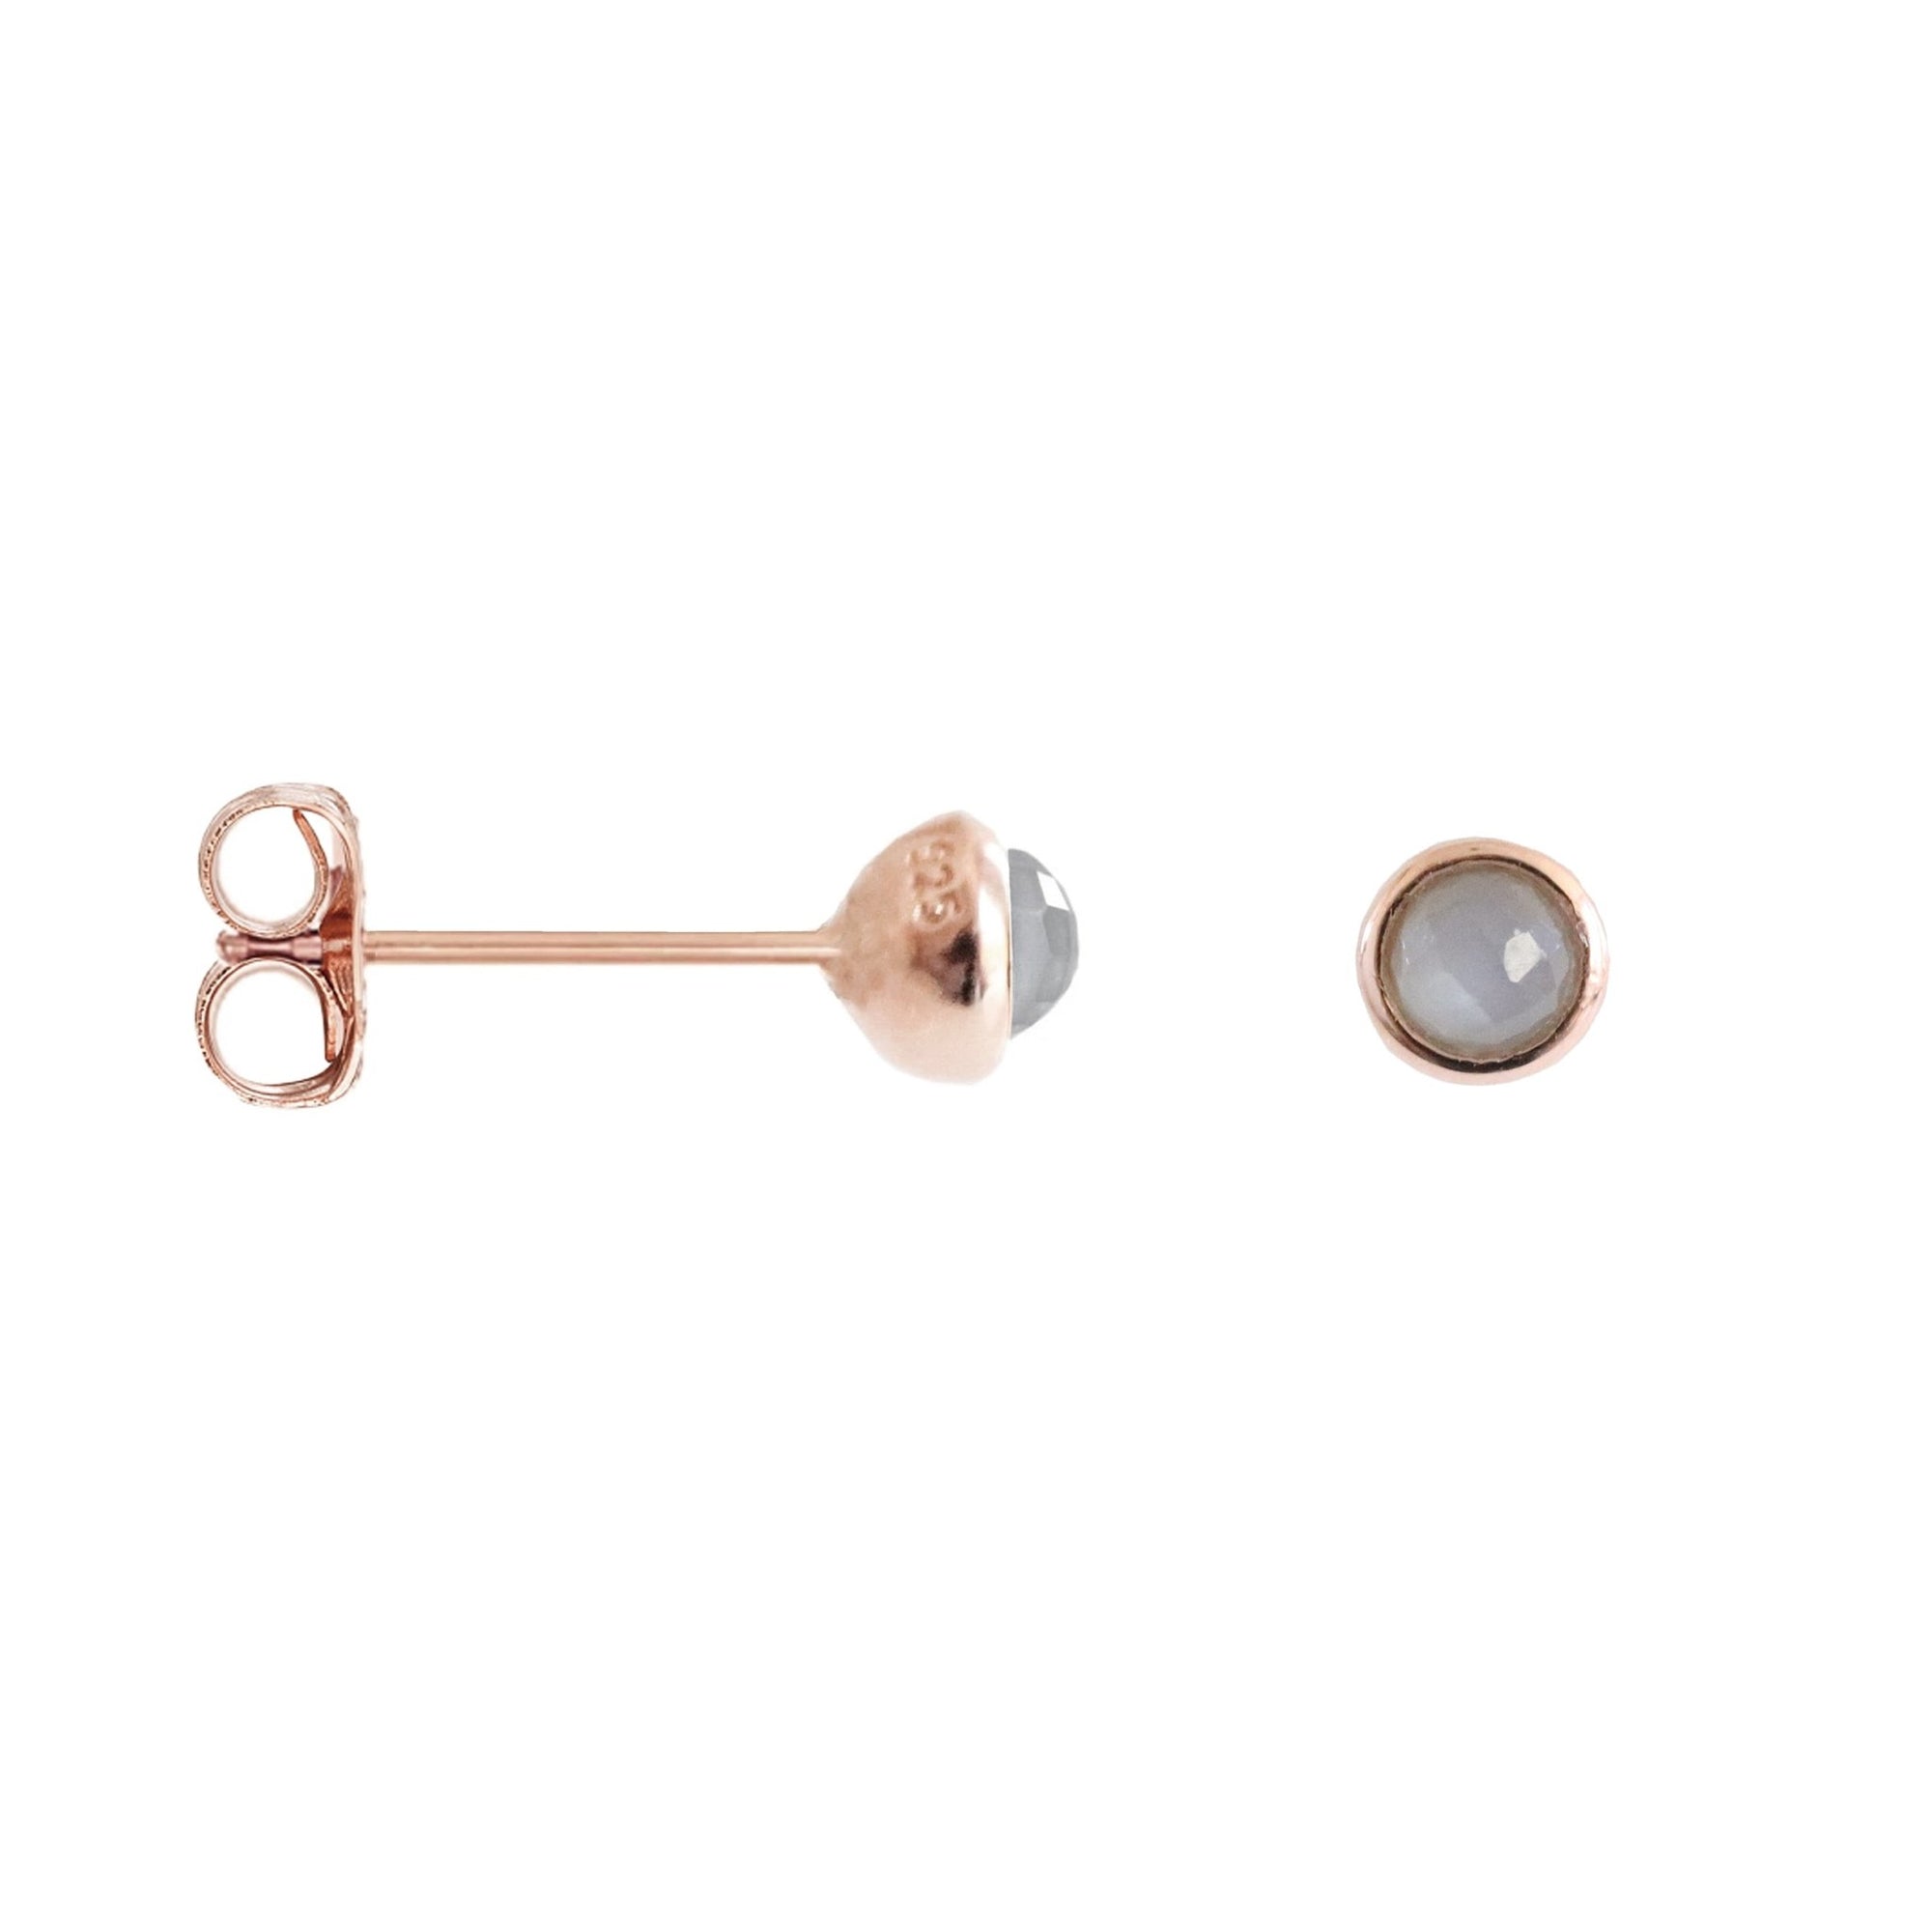 TINY PROTECT STUD EARRINGS - GREY MOONSTONE & ROSE GOLD - SO PRETTY CARA COTTER